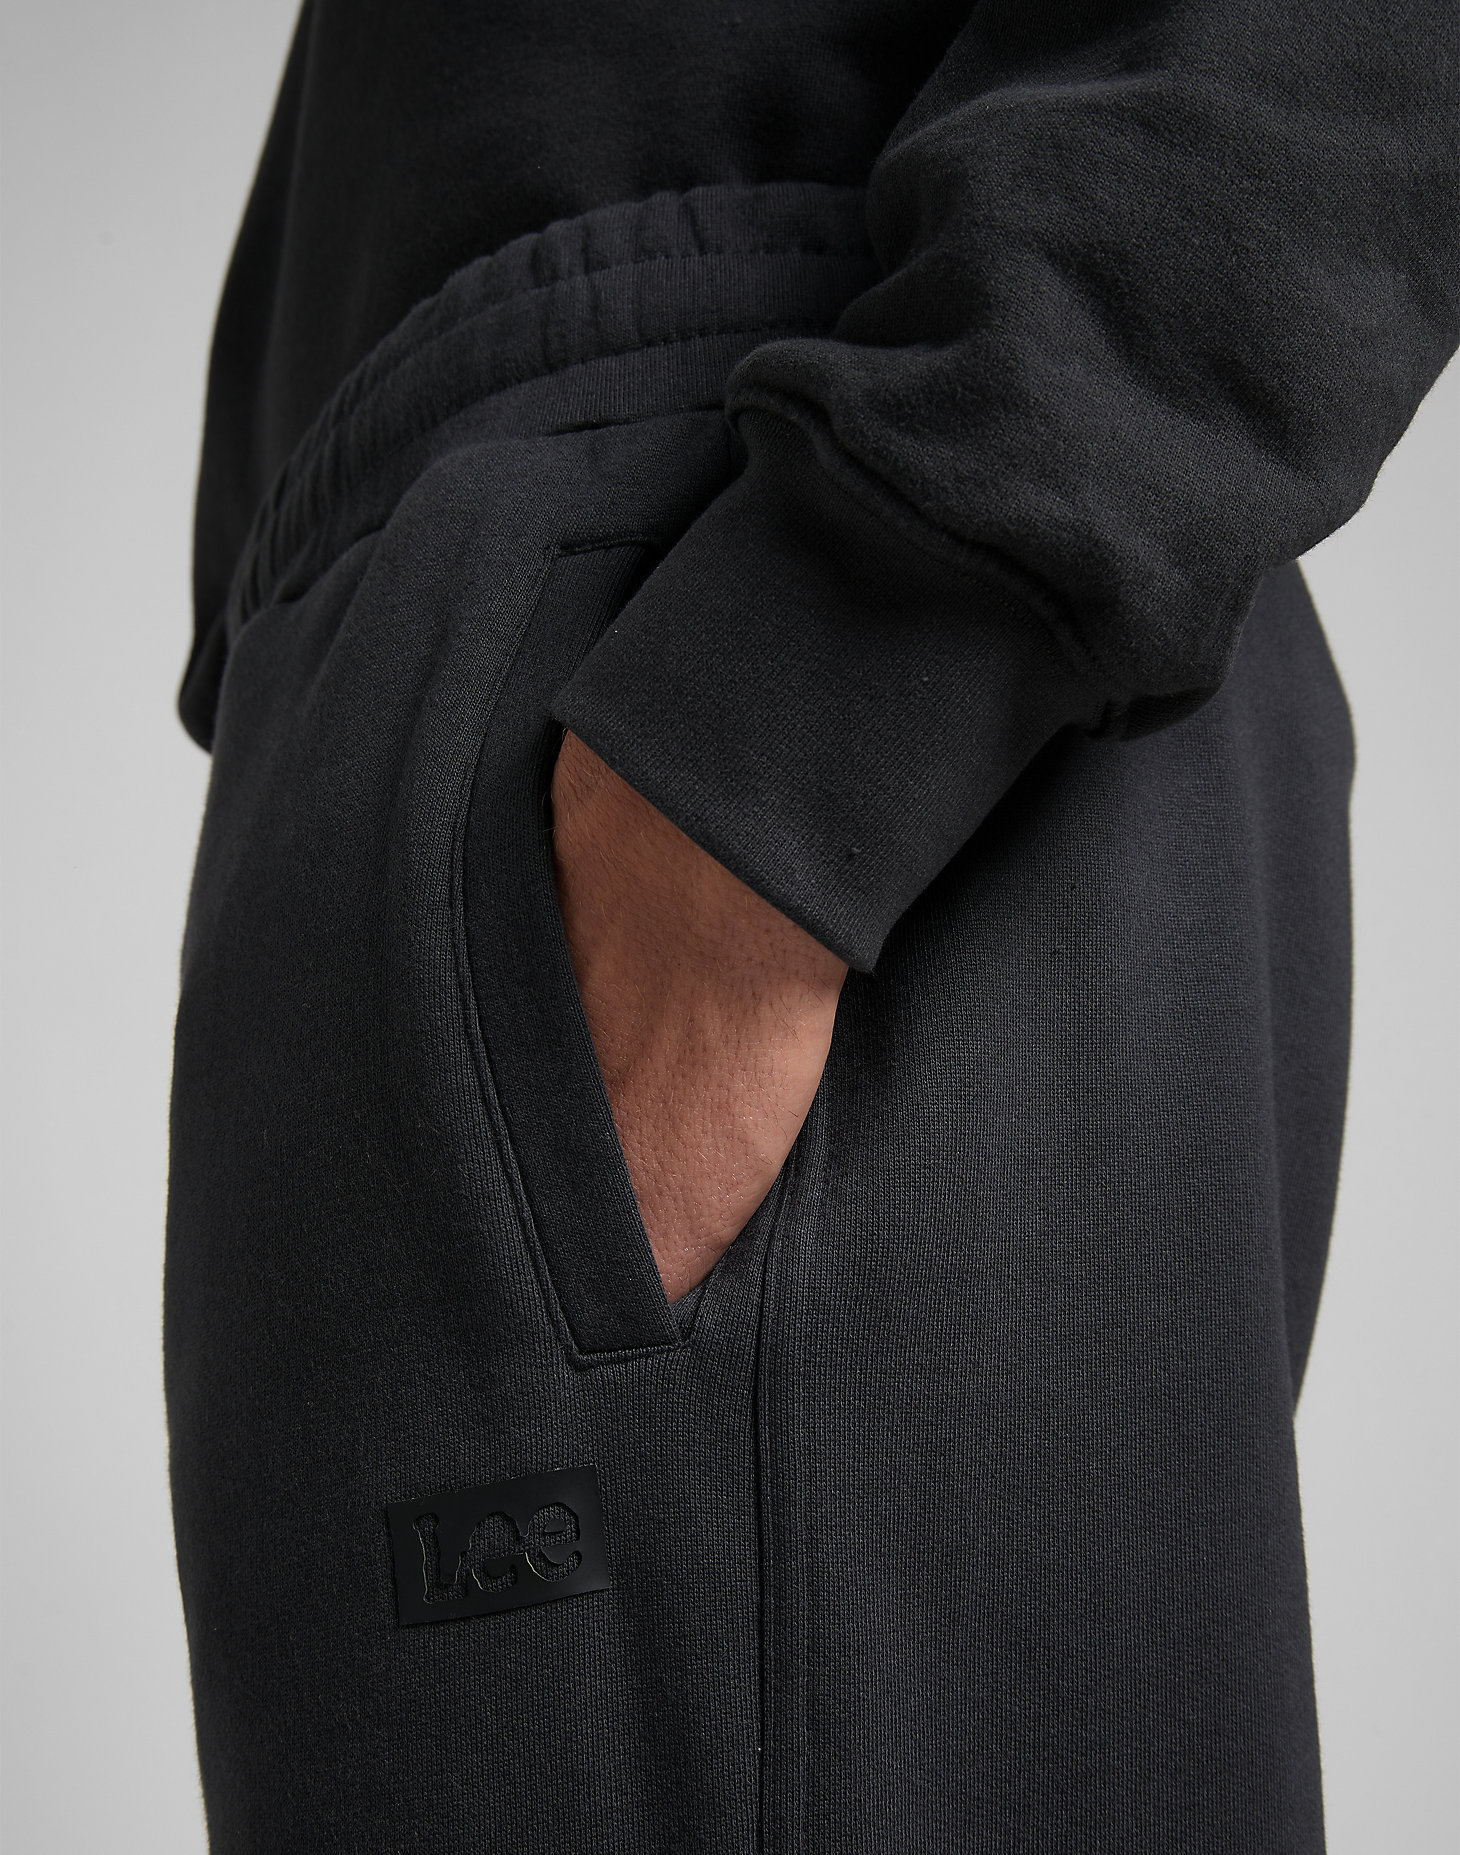 Sweat Pant in Washed Black alternative view 4